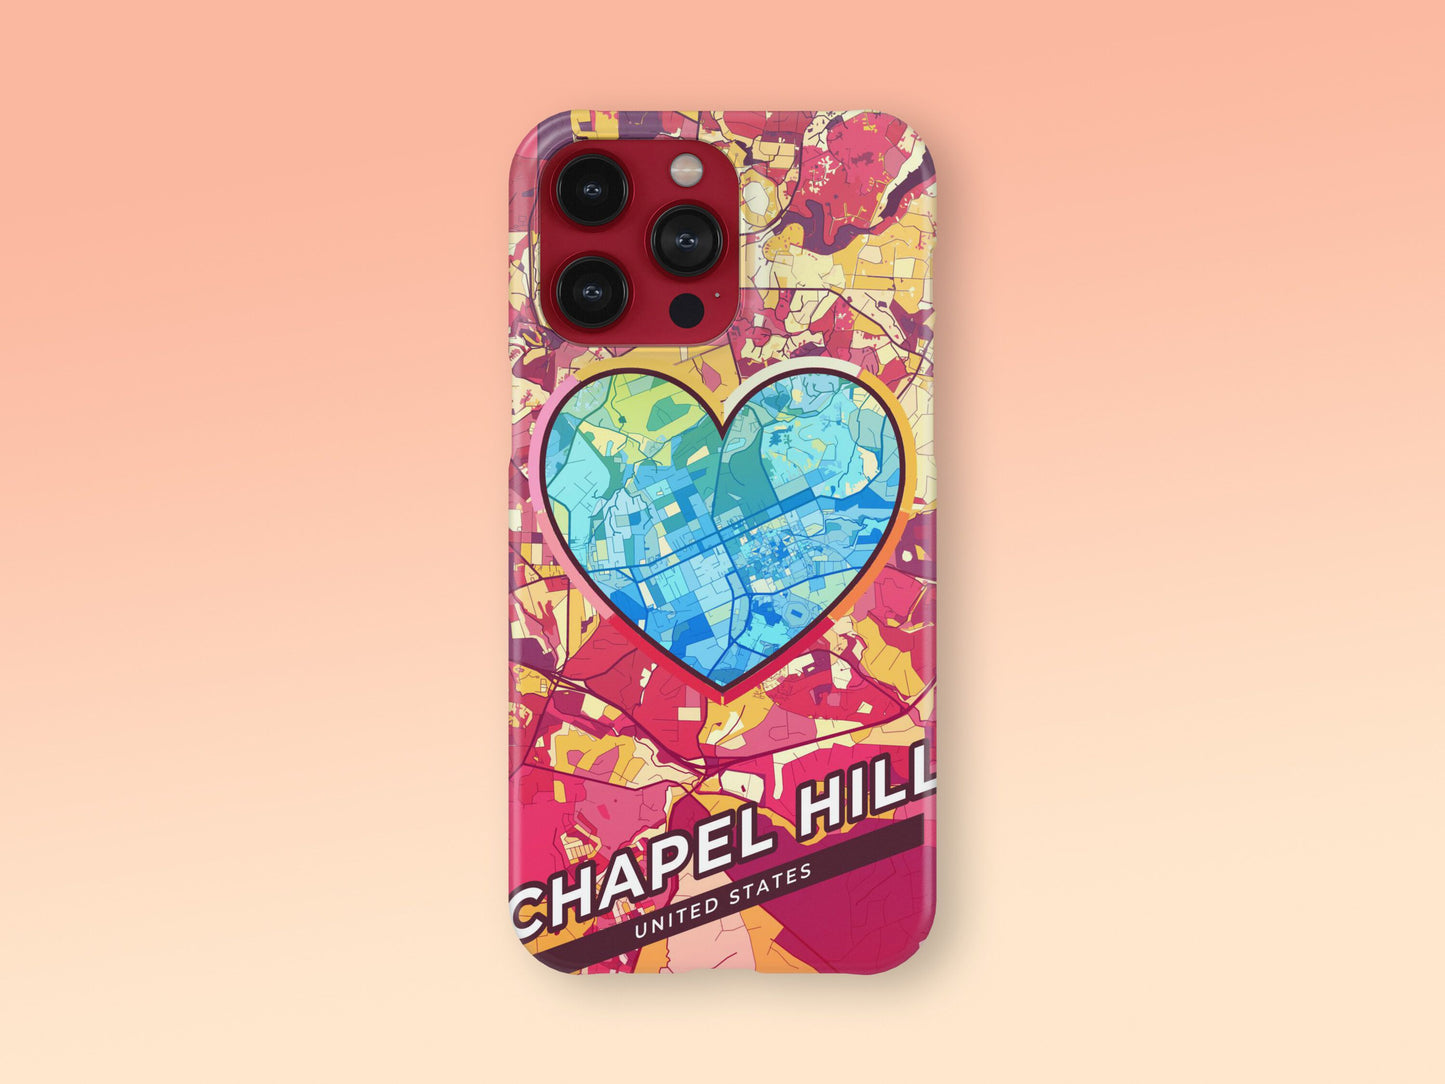 Chapel Hill North Carolina slim phone case with colorful icon. Birthday, wedding or housewarming gift. Couple match cases. 2